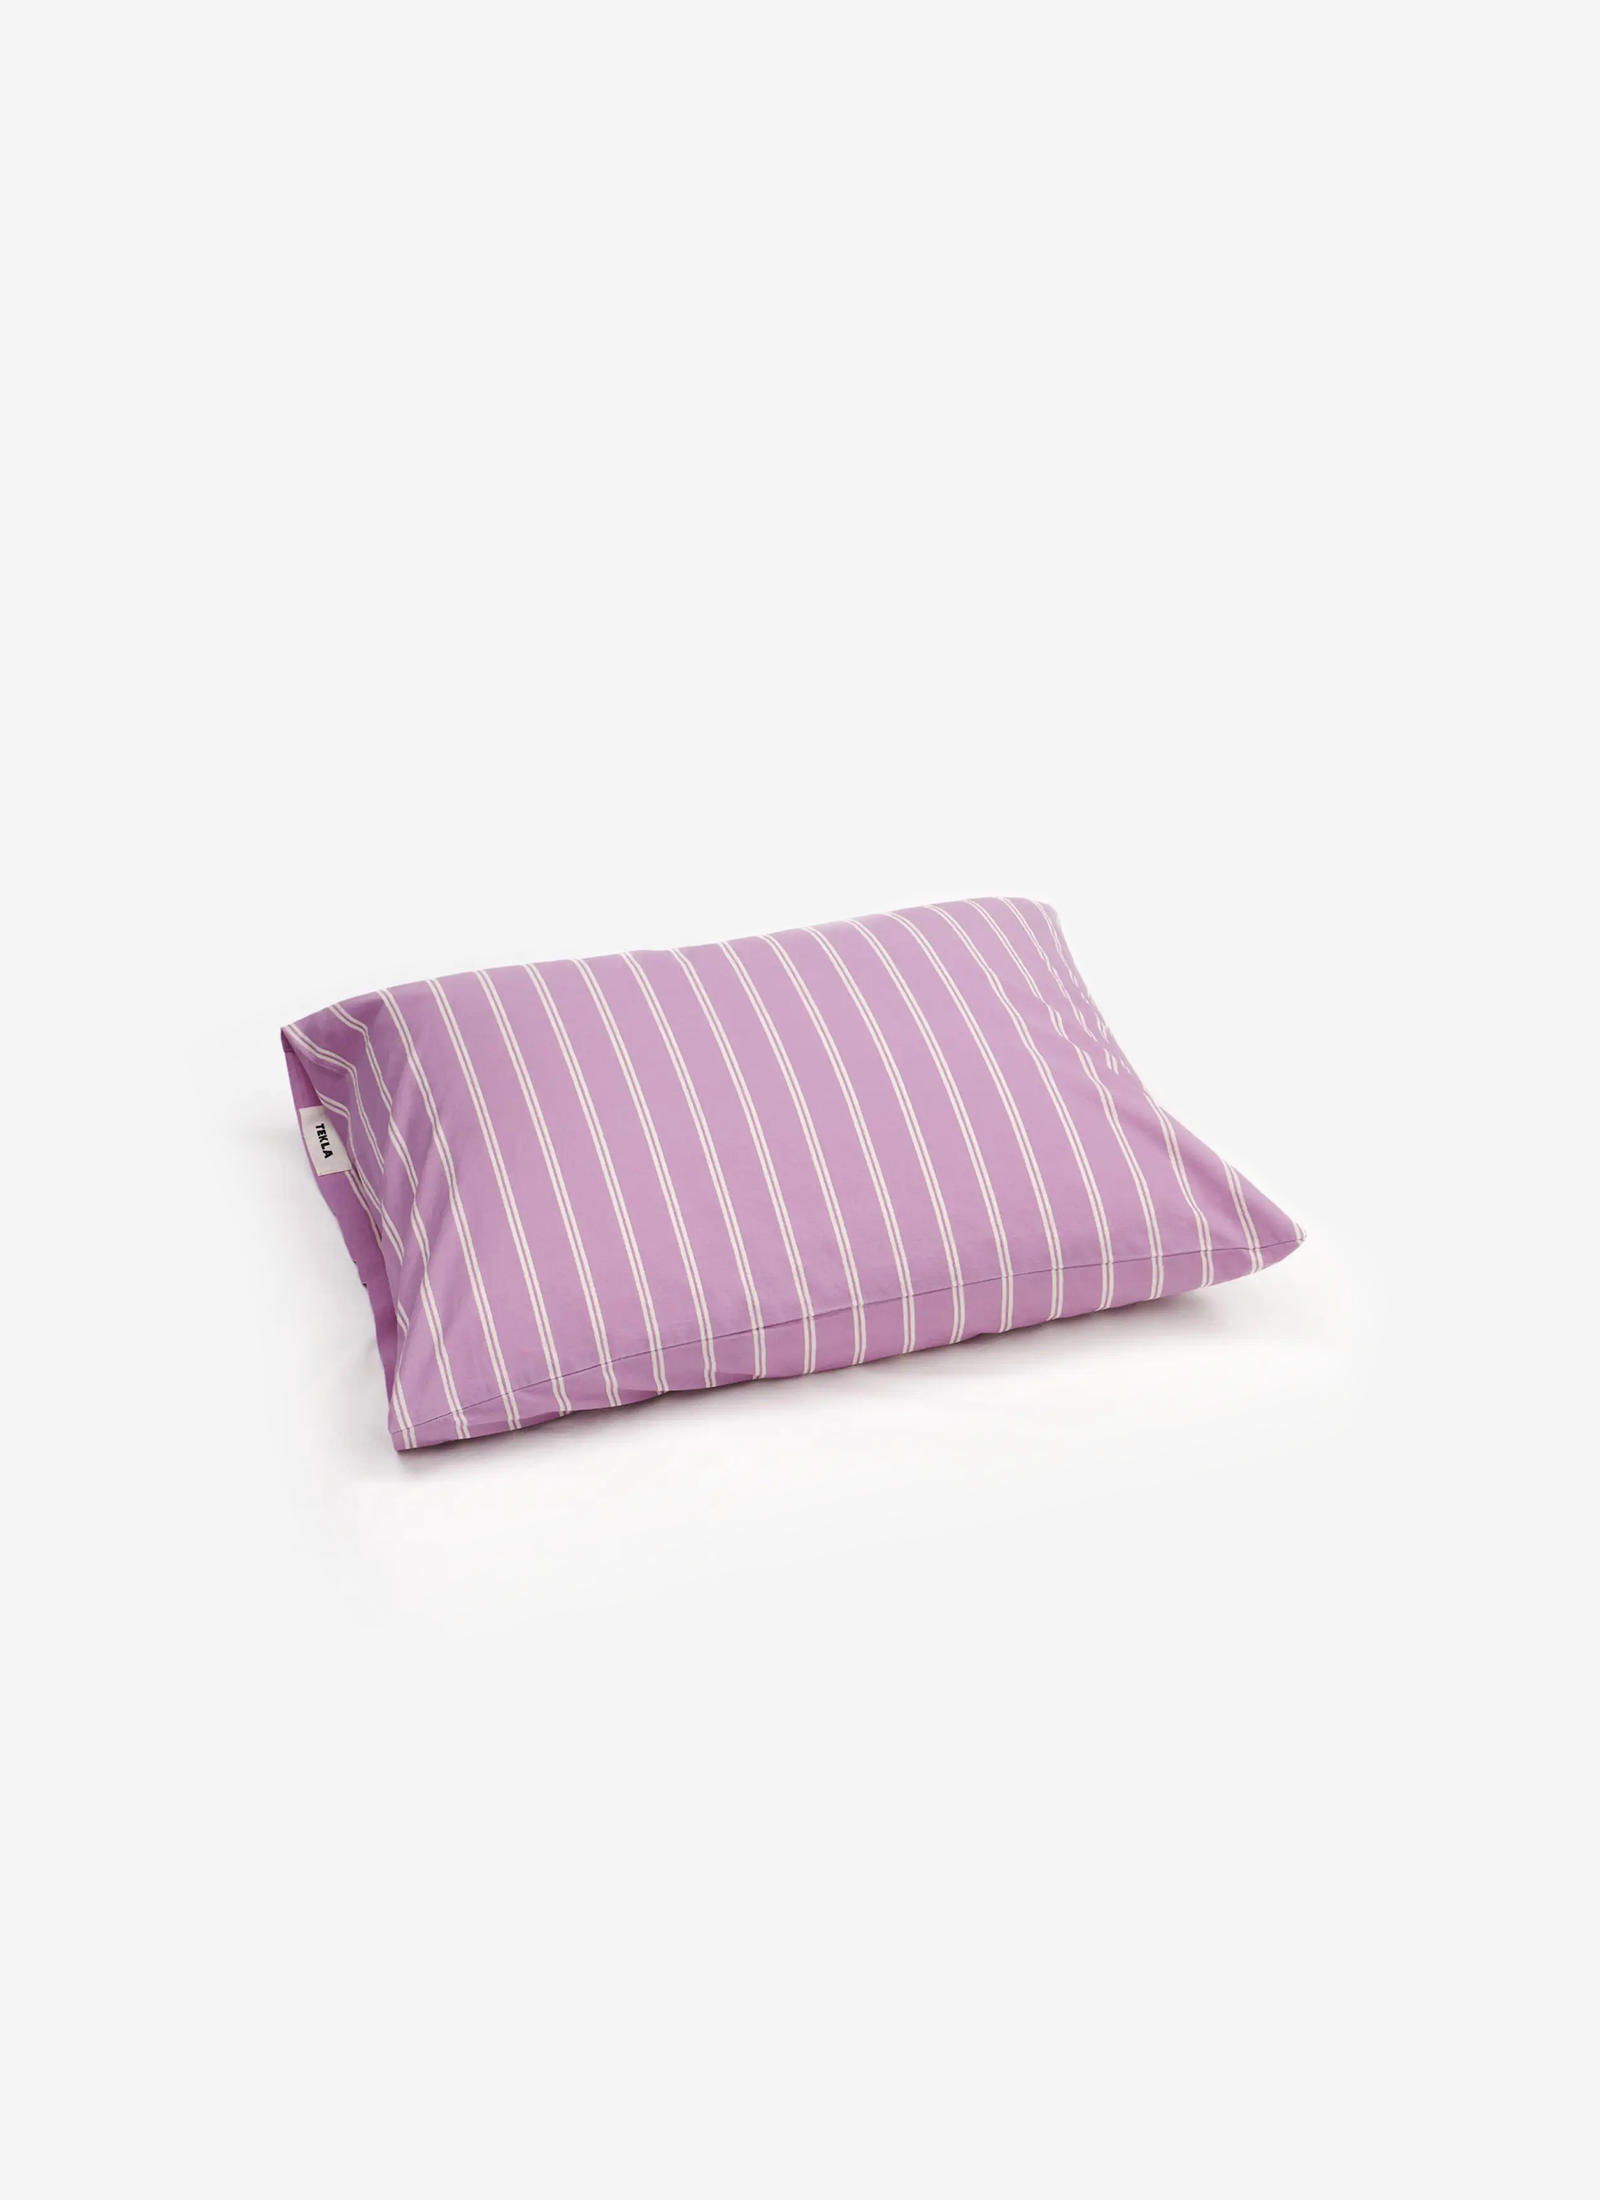 Pillowcases in Mallow Pink Stripes - Pair